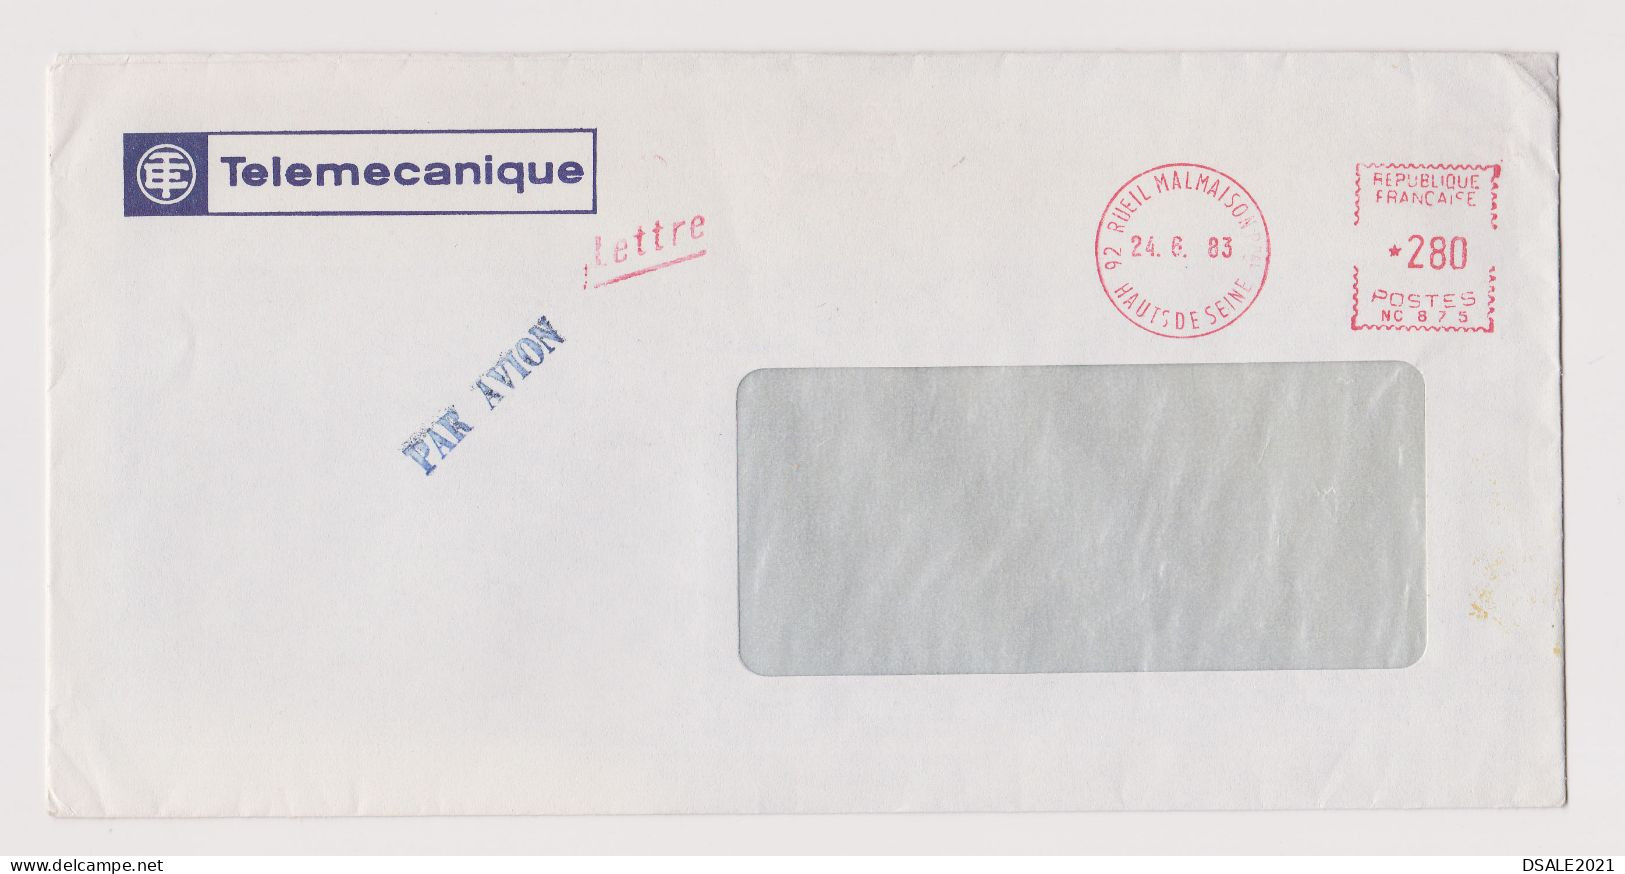 France 1983 Airmail Window Cover With Advertising Machine EMA METER Stamp Cachet, Sent Abroad (66856) - Lettres & Documents